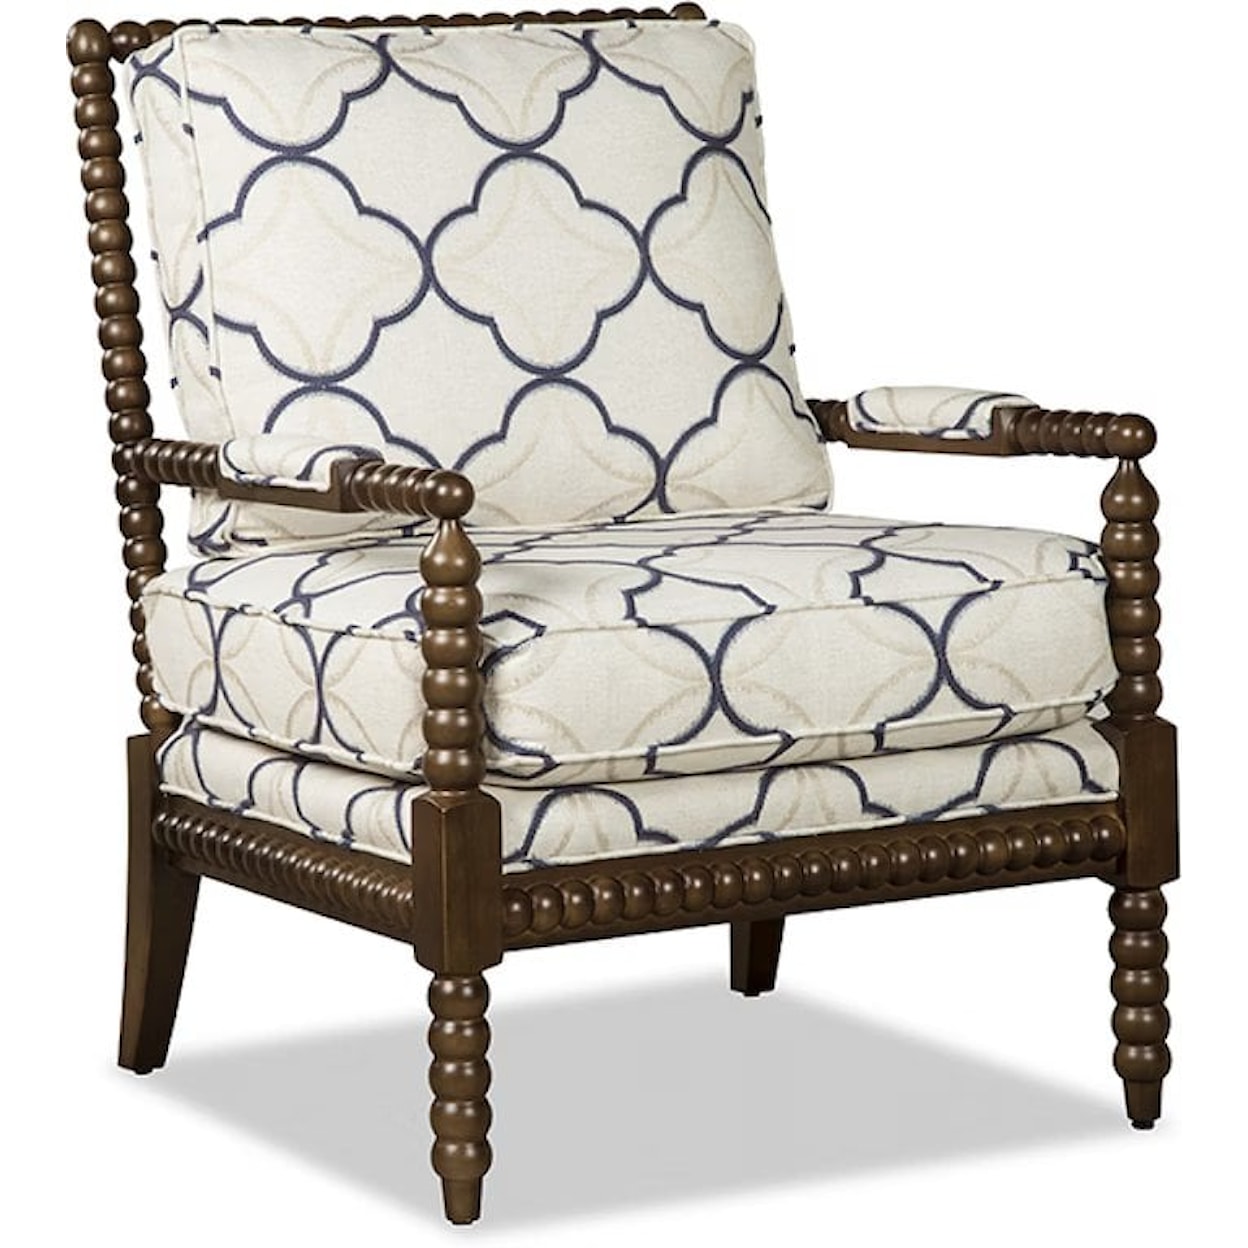 Hickorycraft 052410 Exposed Wood Chair